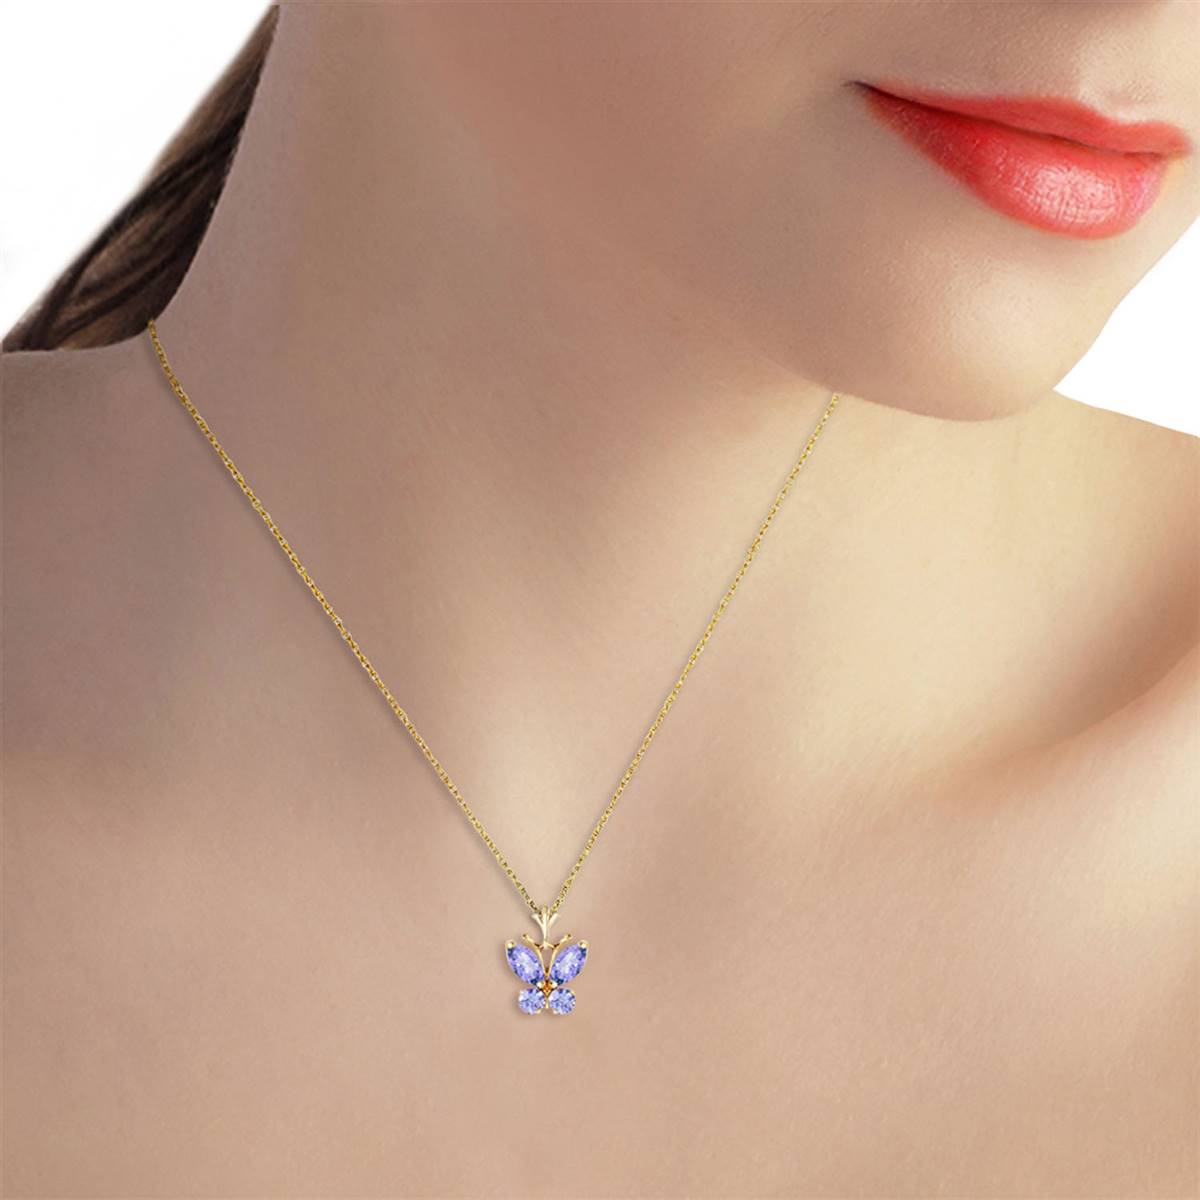 0.6 Carat 14K Solid Yellow Gold Butterfly Necklace Tanzanite